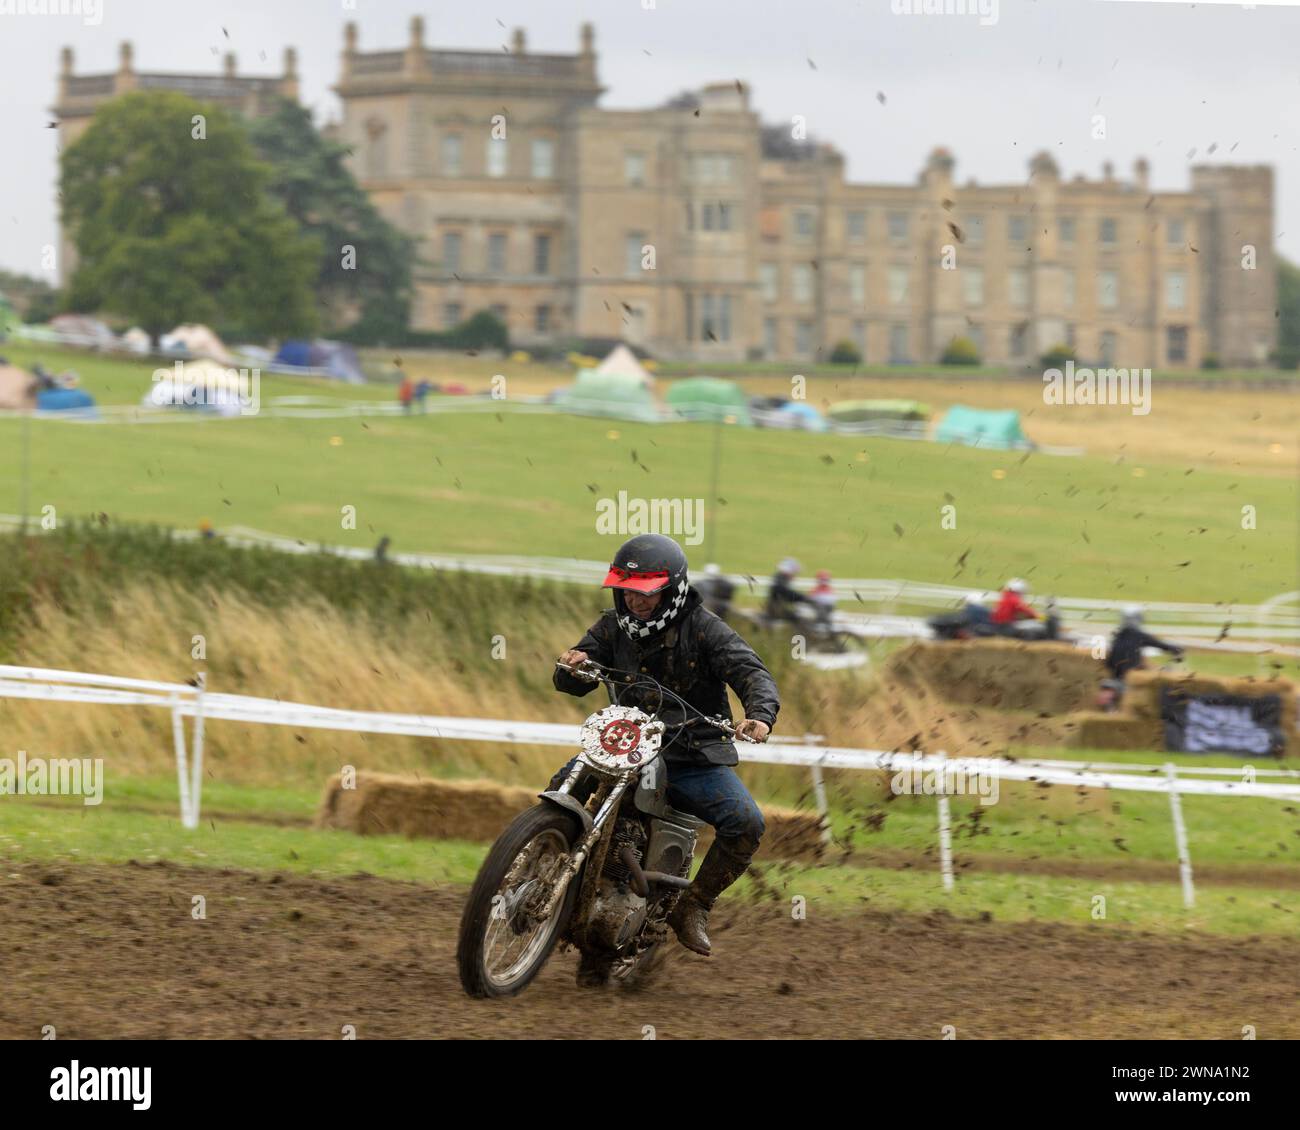 Competitors brave torrential rain and slippery mud & play moto polo at the Malle Mile Festival at Grimsthorpe Castle, Lincolnshire. Stock Photo